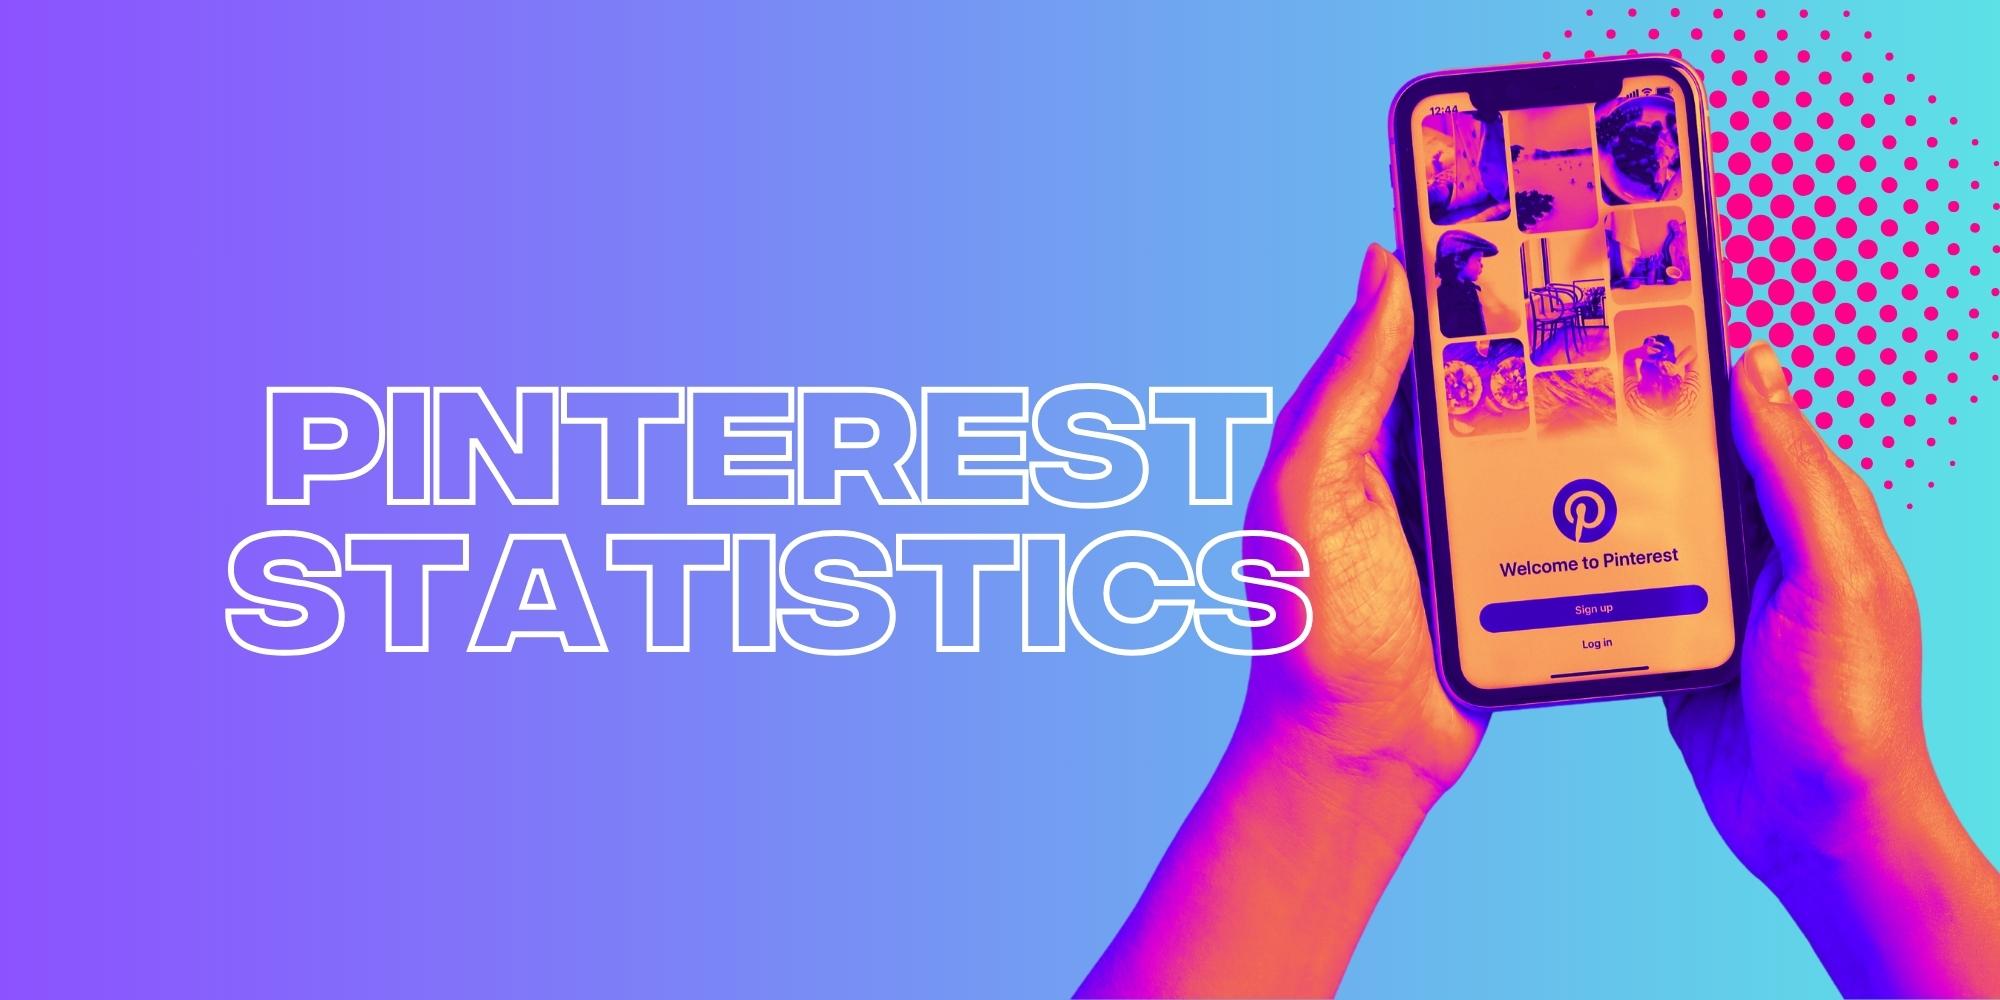 20 Pinterest Statistics Marketers Need To Know For 2023